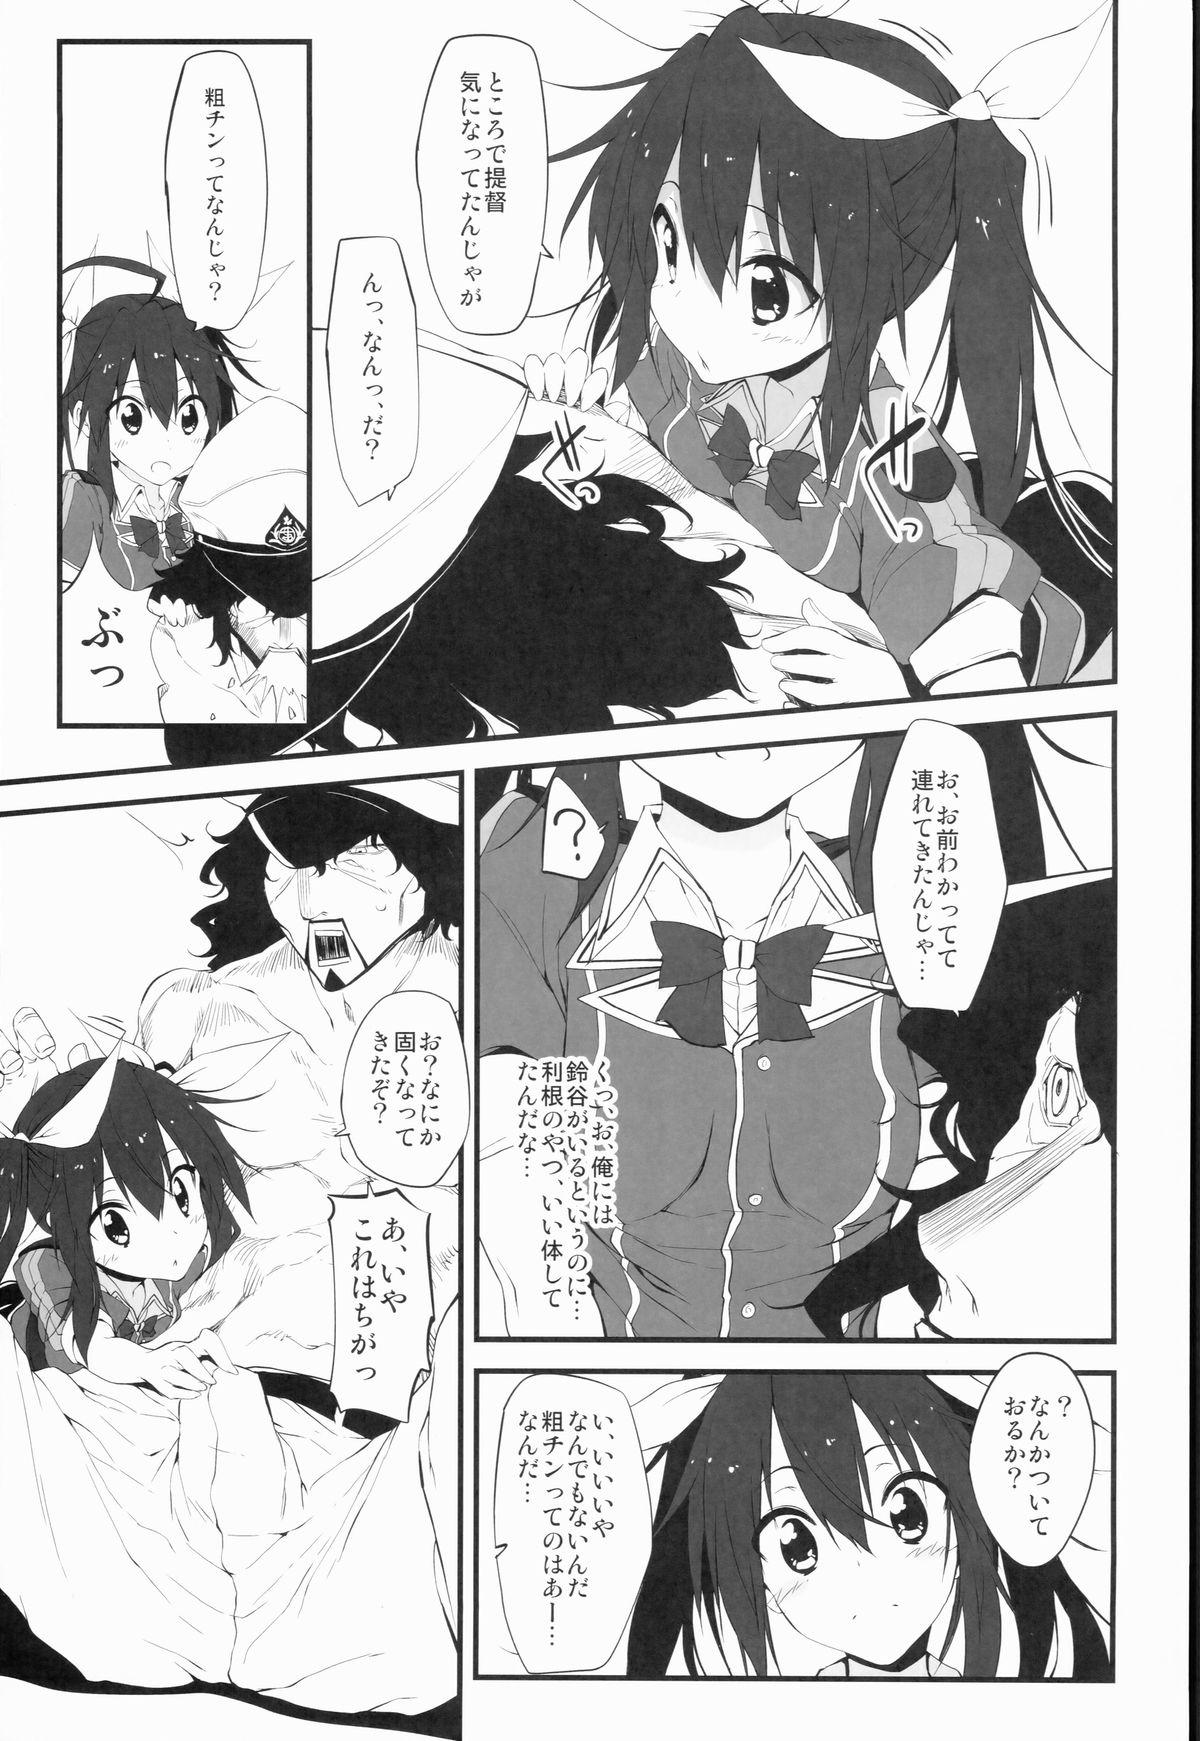 Butts Marked-girls Vol. 2 - Kantai collection Hot Whores - Page 6